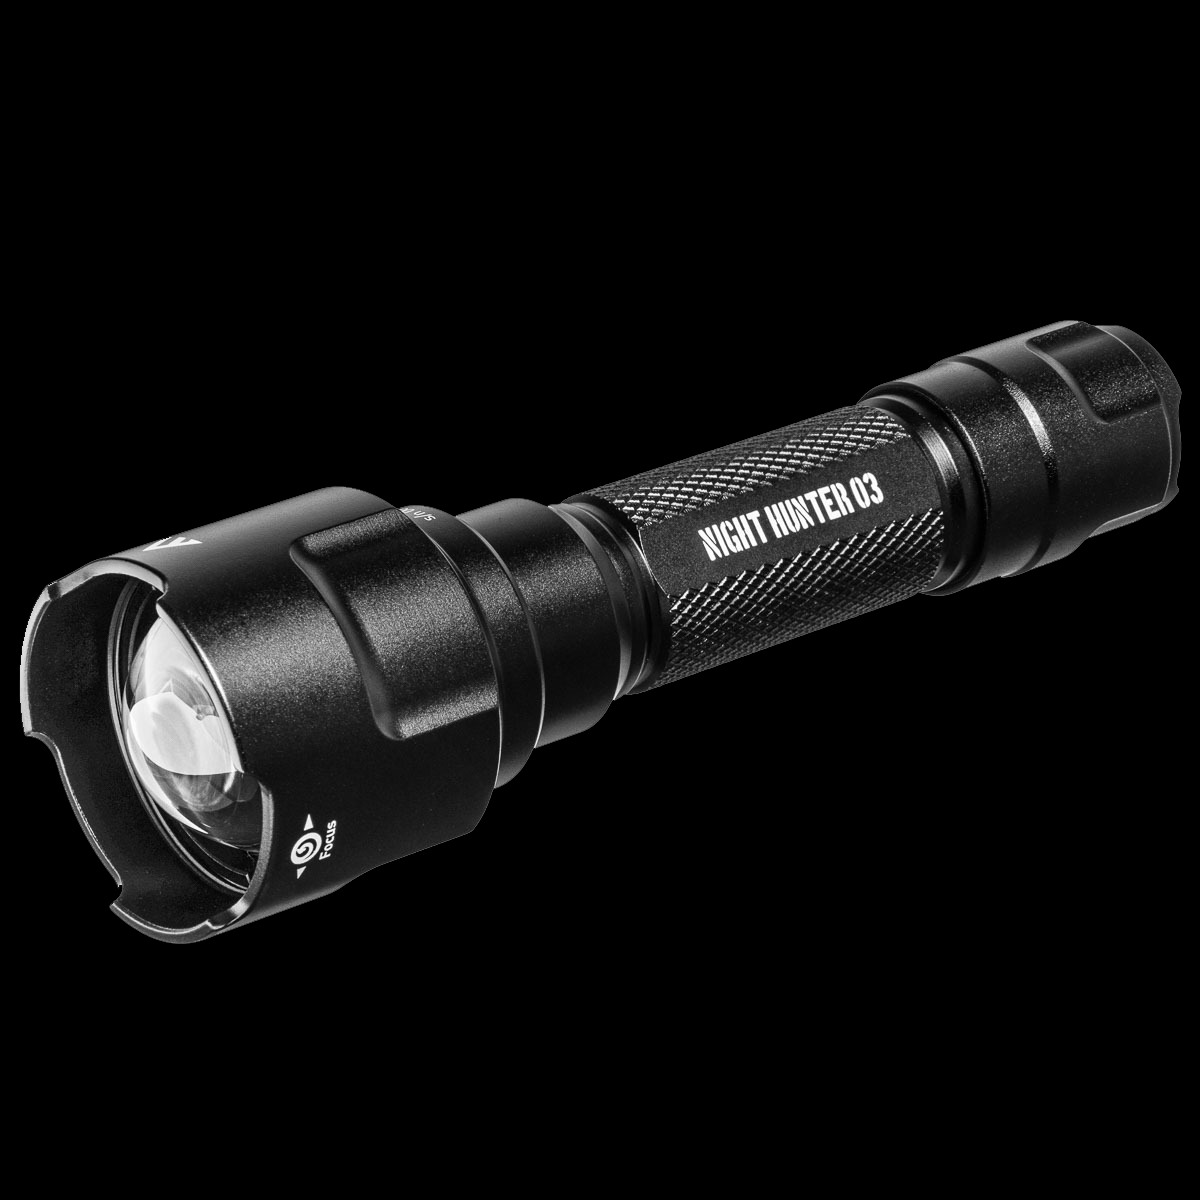 Tactical Flashlight with Focus, 1150lm, NIGHT HUNTER 03